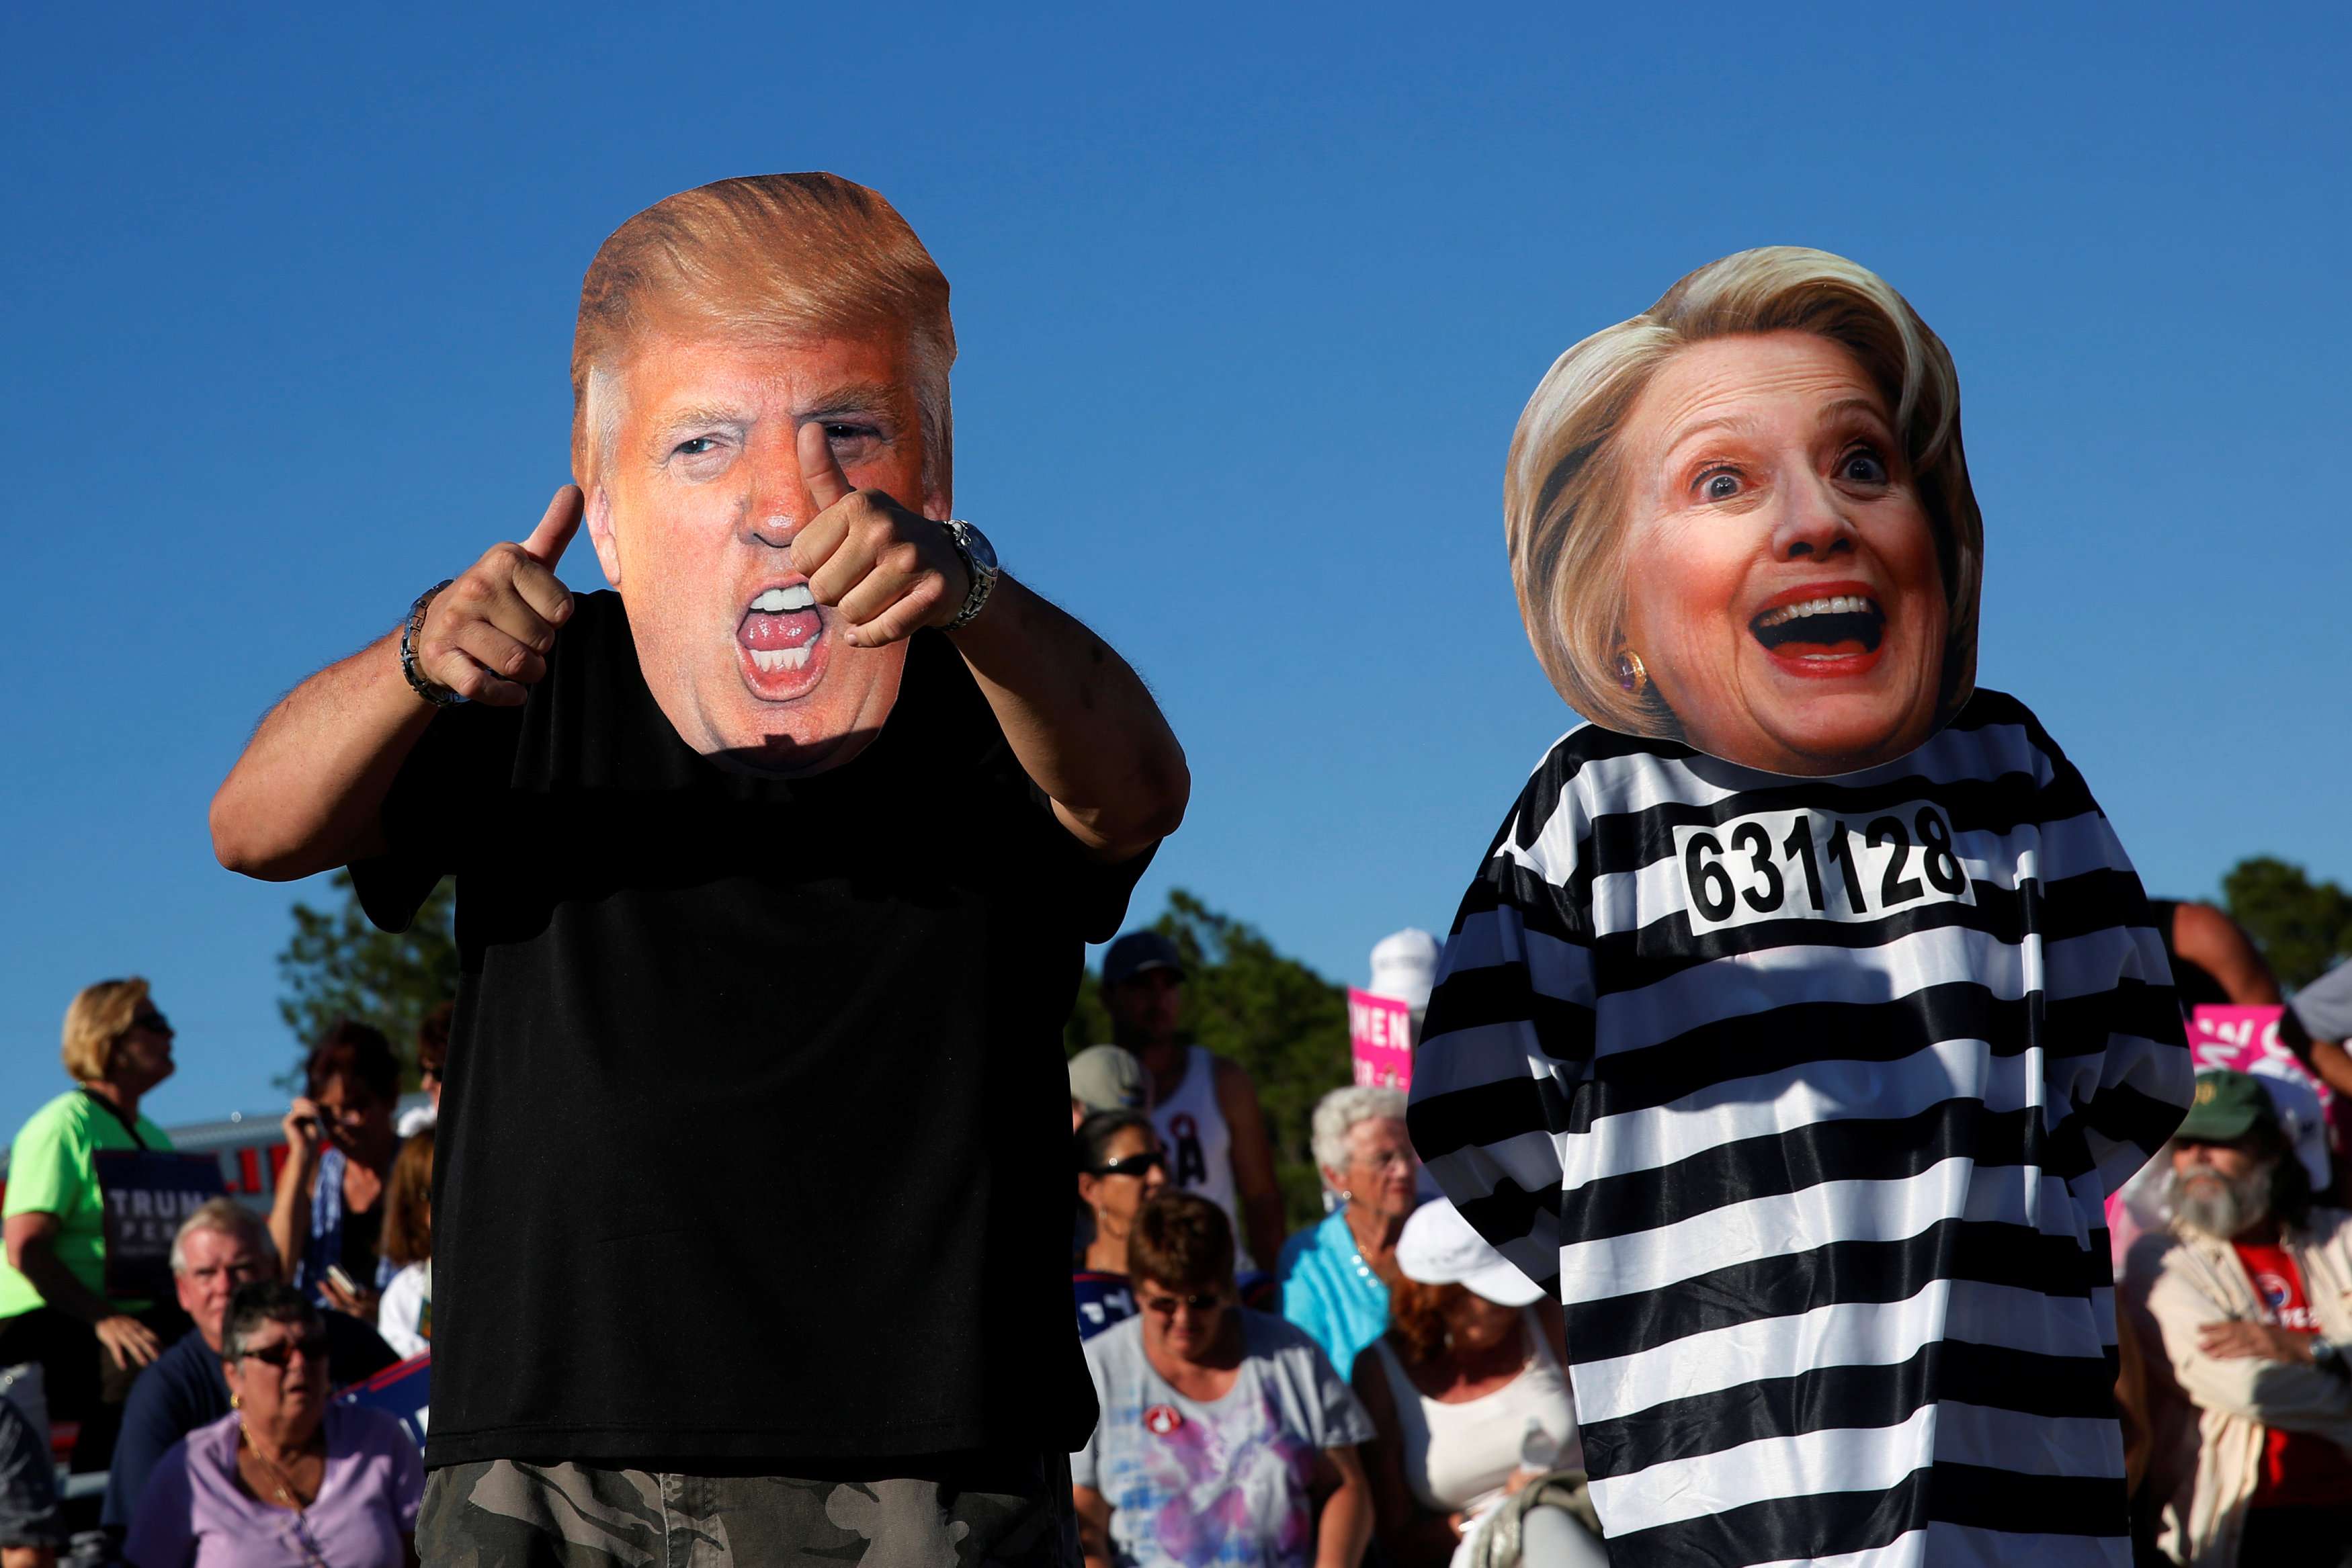 Supporters of Donald Trump make their feelings clear about US presidential rival Hillary Clinton at a campaign rally in Naples, Florida, on October 23. Photo: Reuters